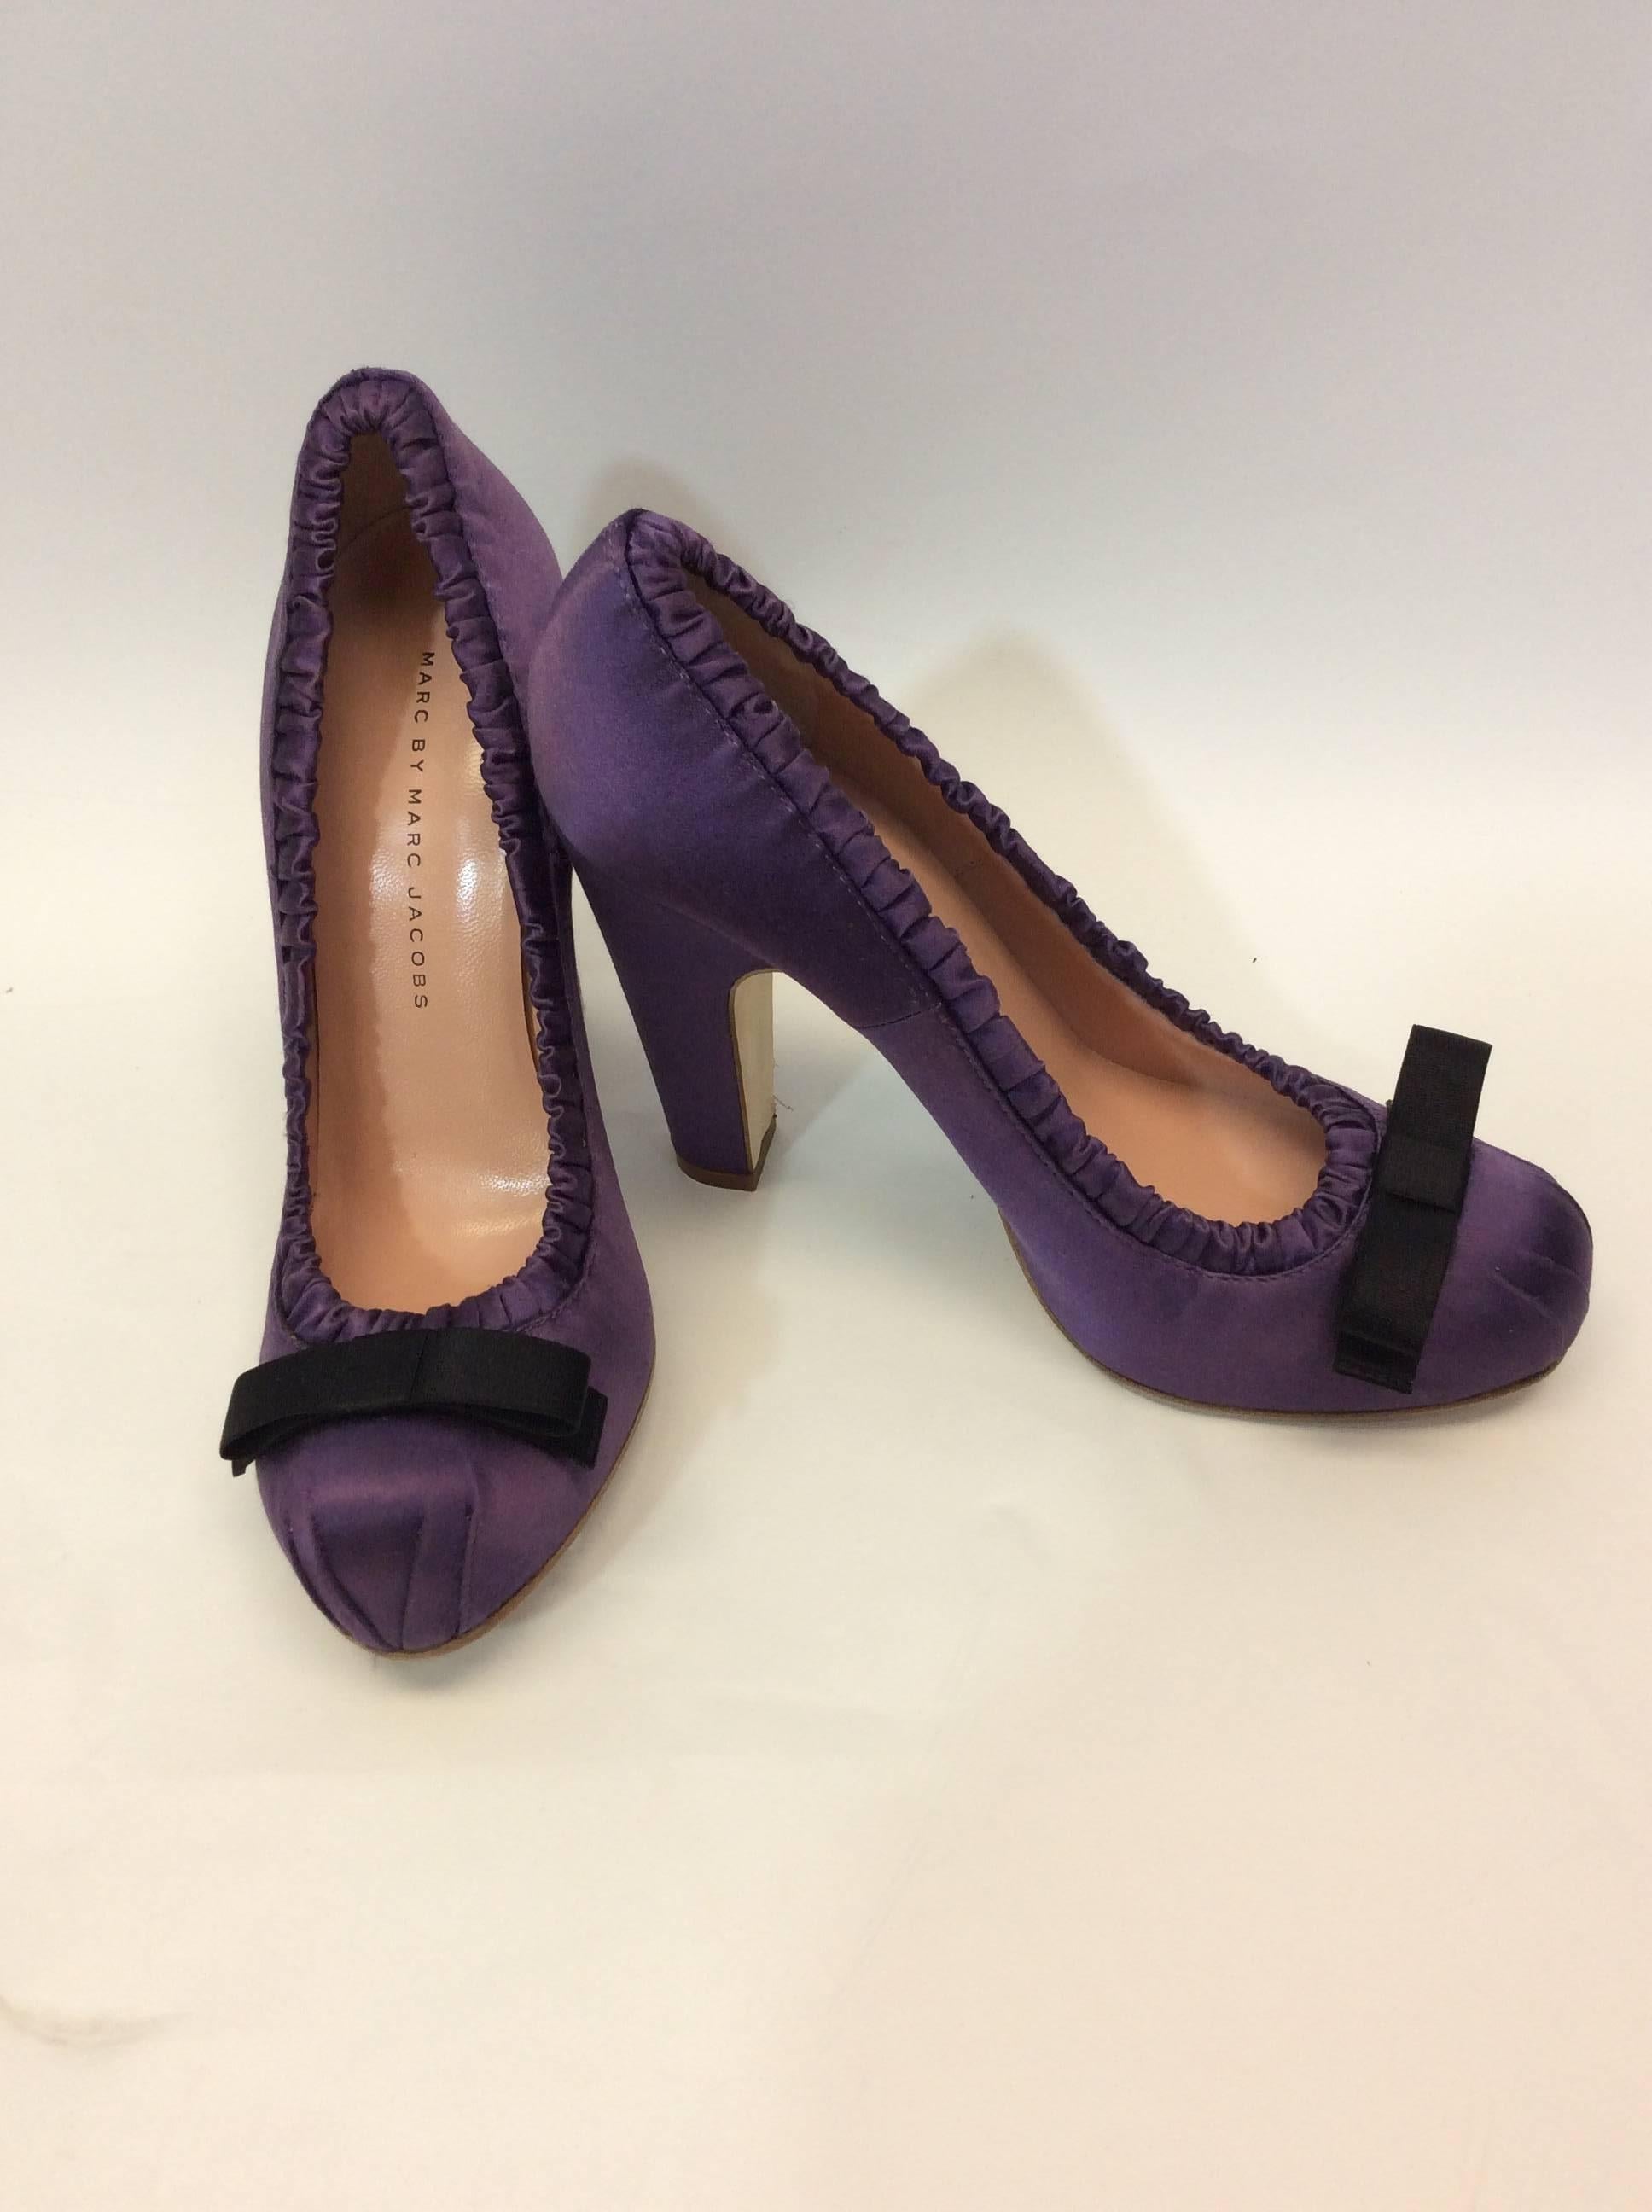 Marc by Marc Jacobs Purple Satin Pumps with Black Bow Detail In Excellent Condition For Sale In Narberth, PA